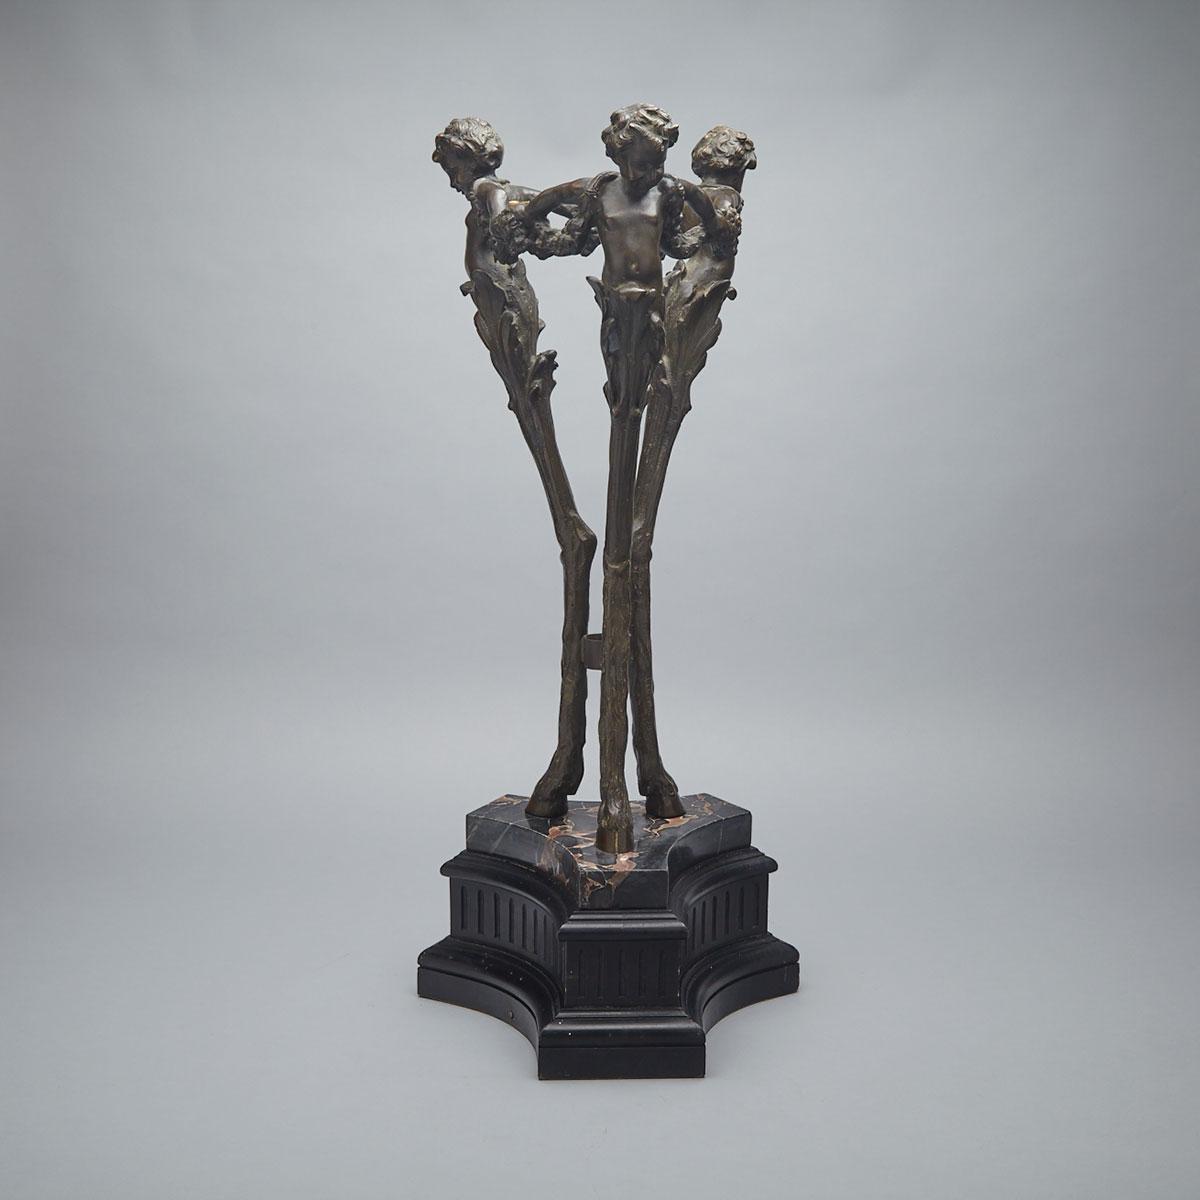 French Patintated Bronze Figural Tripod Guéridon Stand, mid 20th century